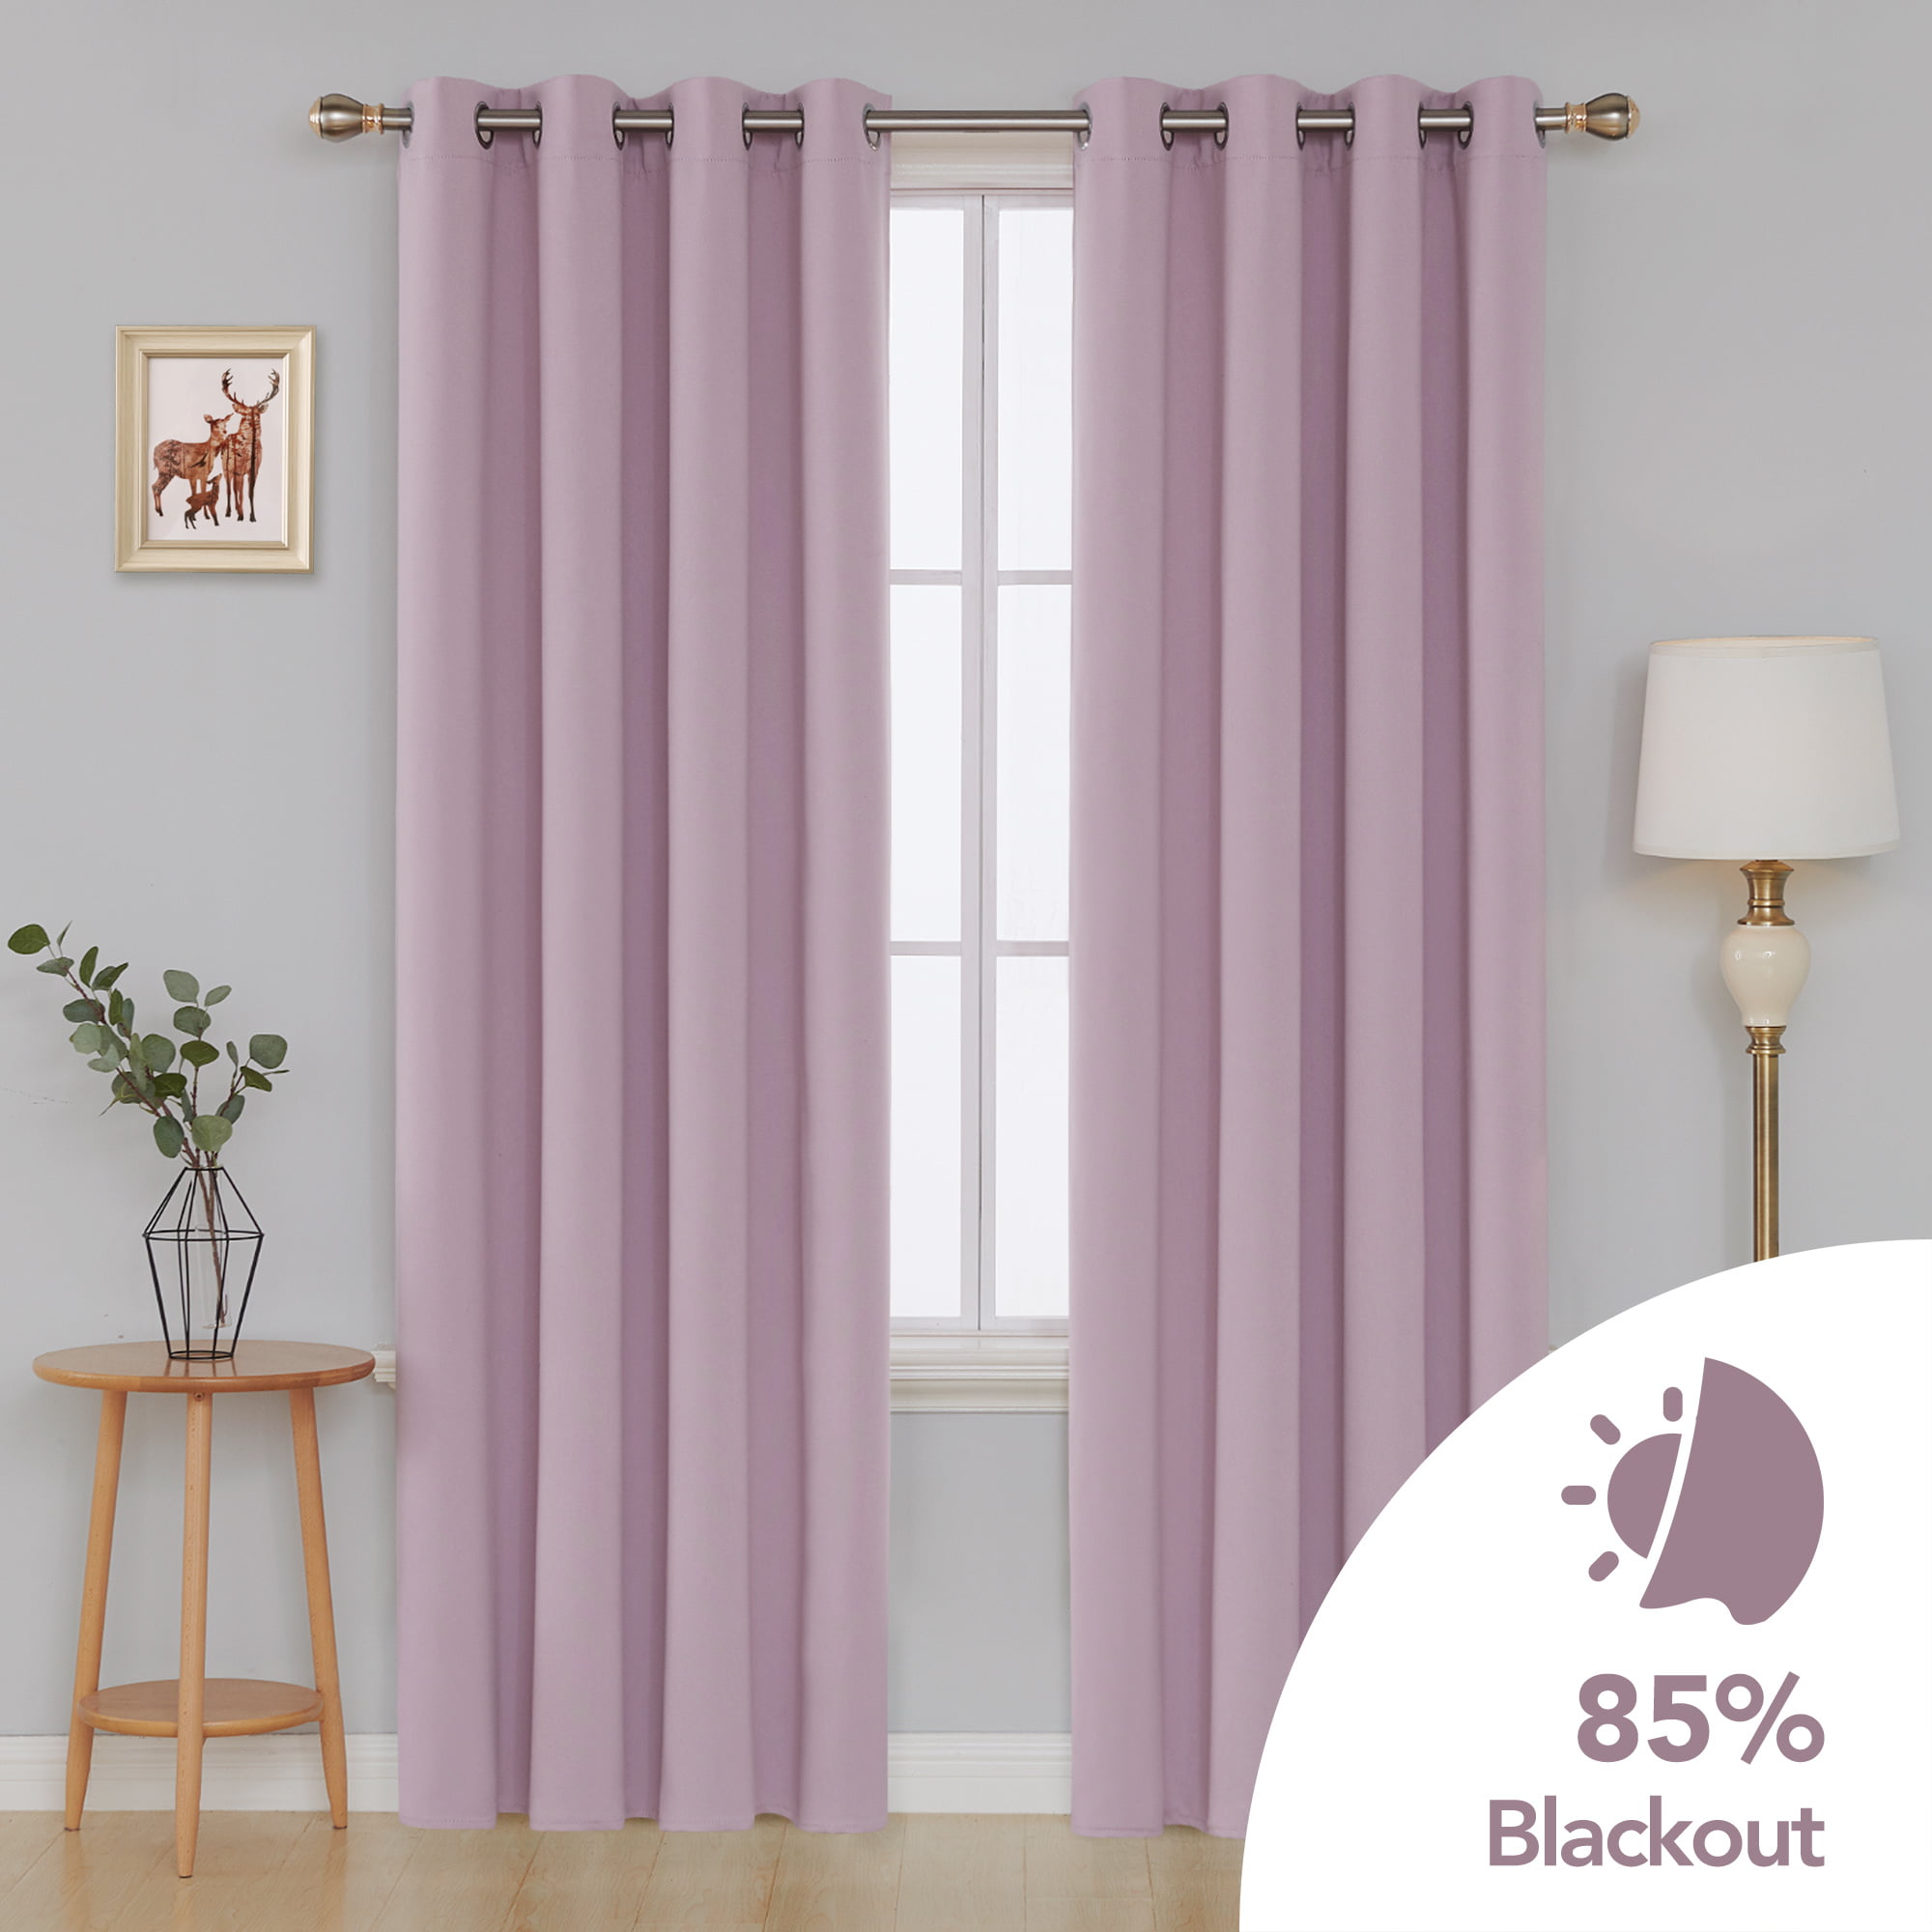 Baby Pink Deconovo Grommet Top Mix and Match Thermal Insulated Panel Blackout Curtians 2 Pieces Lavender and 2 Net White Sheer Curtain 52x84 Inch